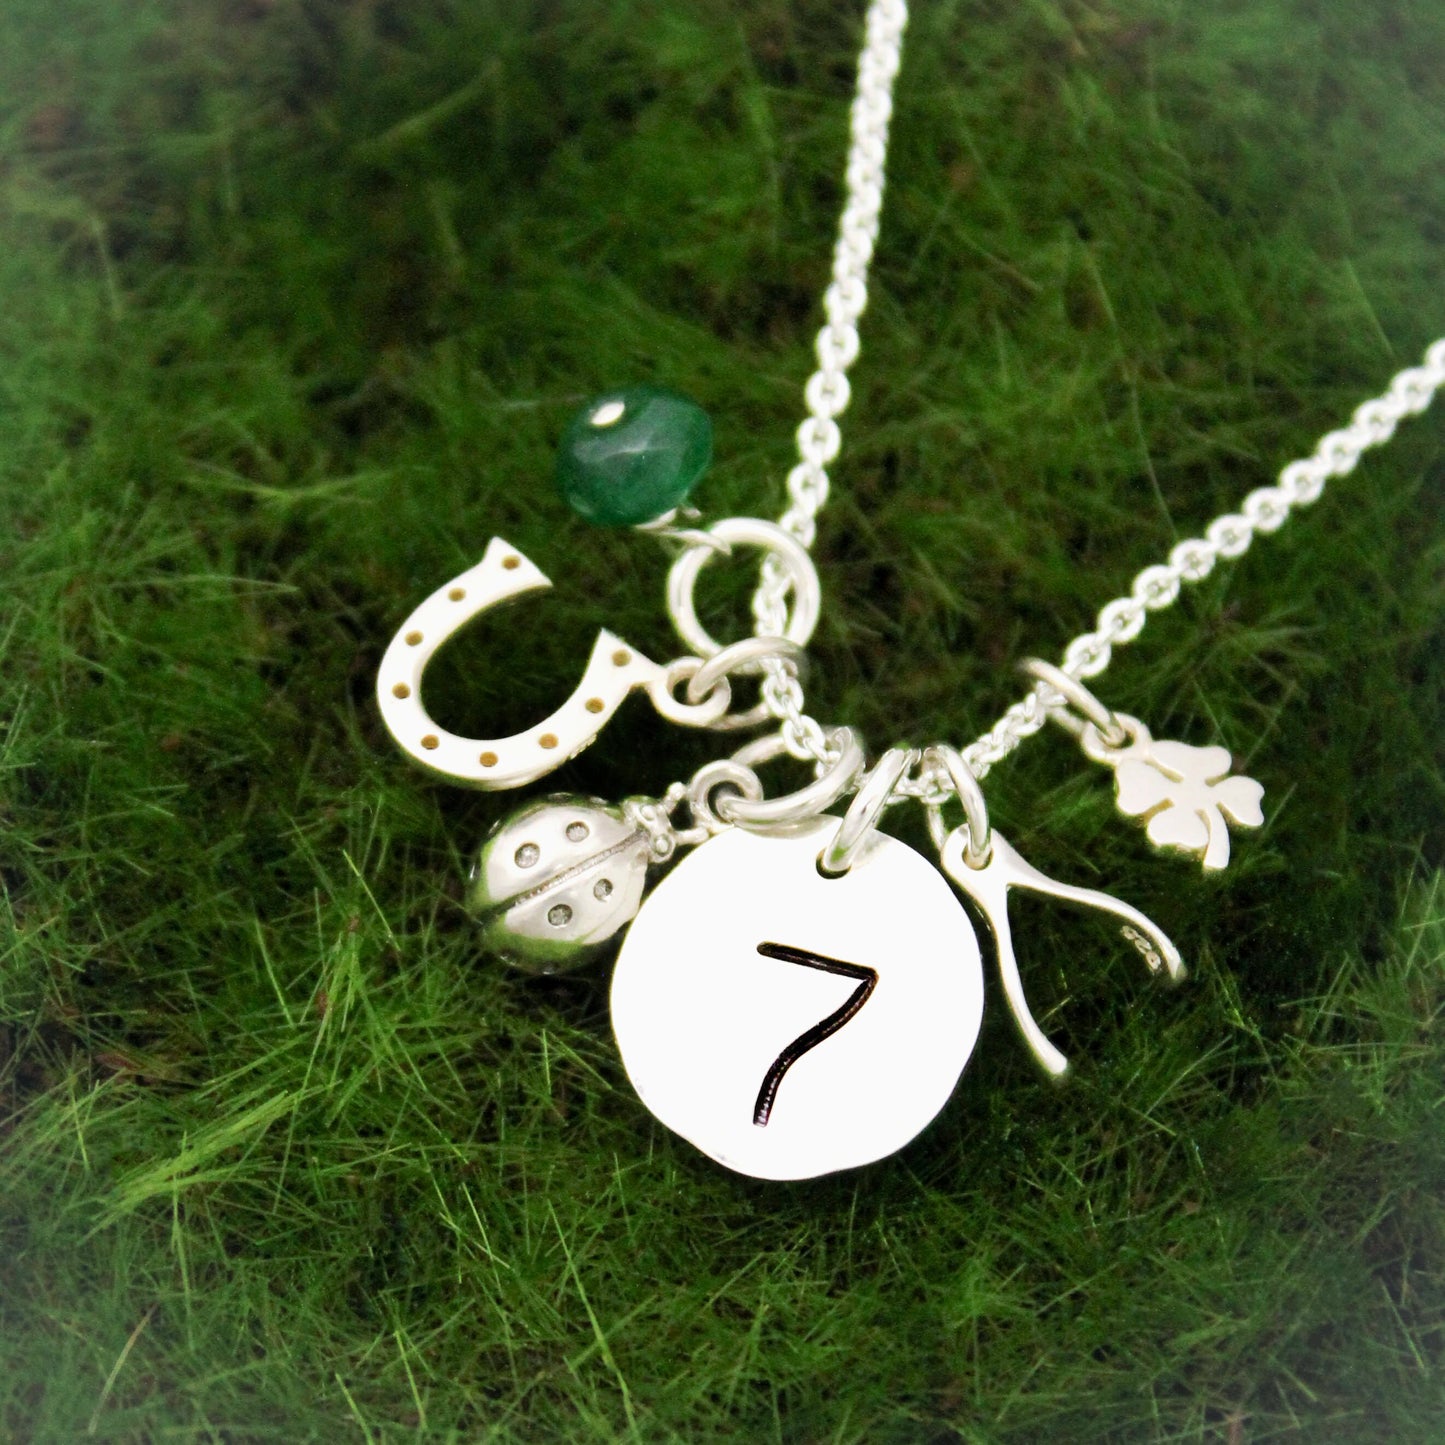 Lucky Charm Necklace, Lucky 7 Horseshoe 4 Leaf Clover Wishbone Charm Necklace, Sterling Silver Lucky Charm Necklace, Hand Stamped Jewelry